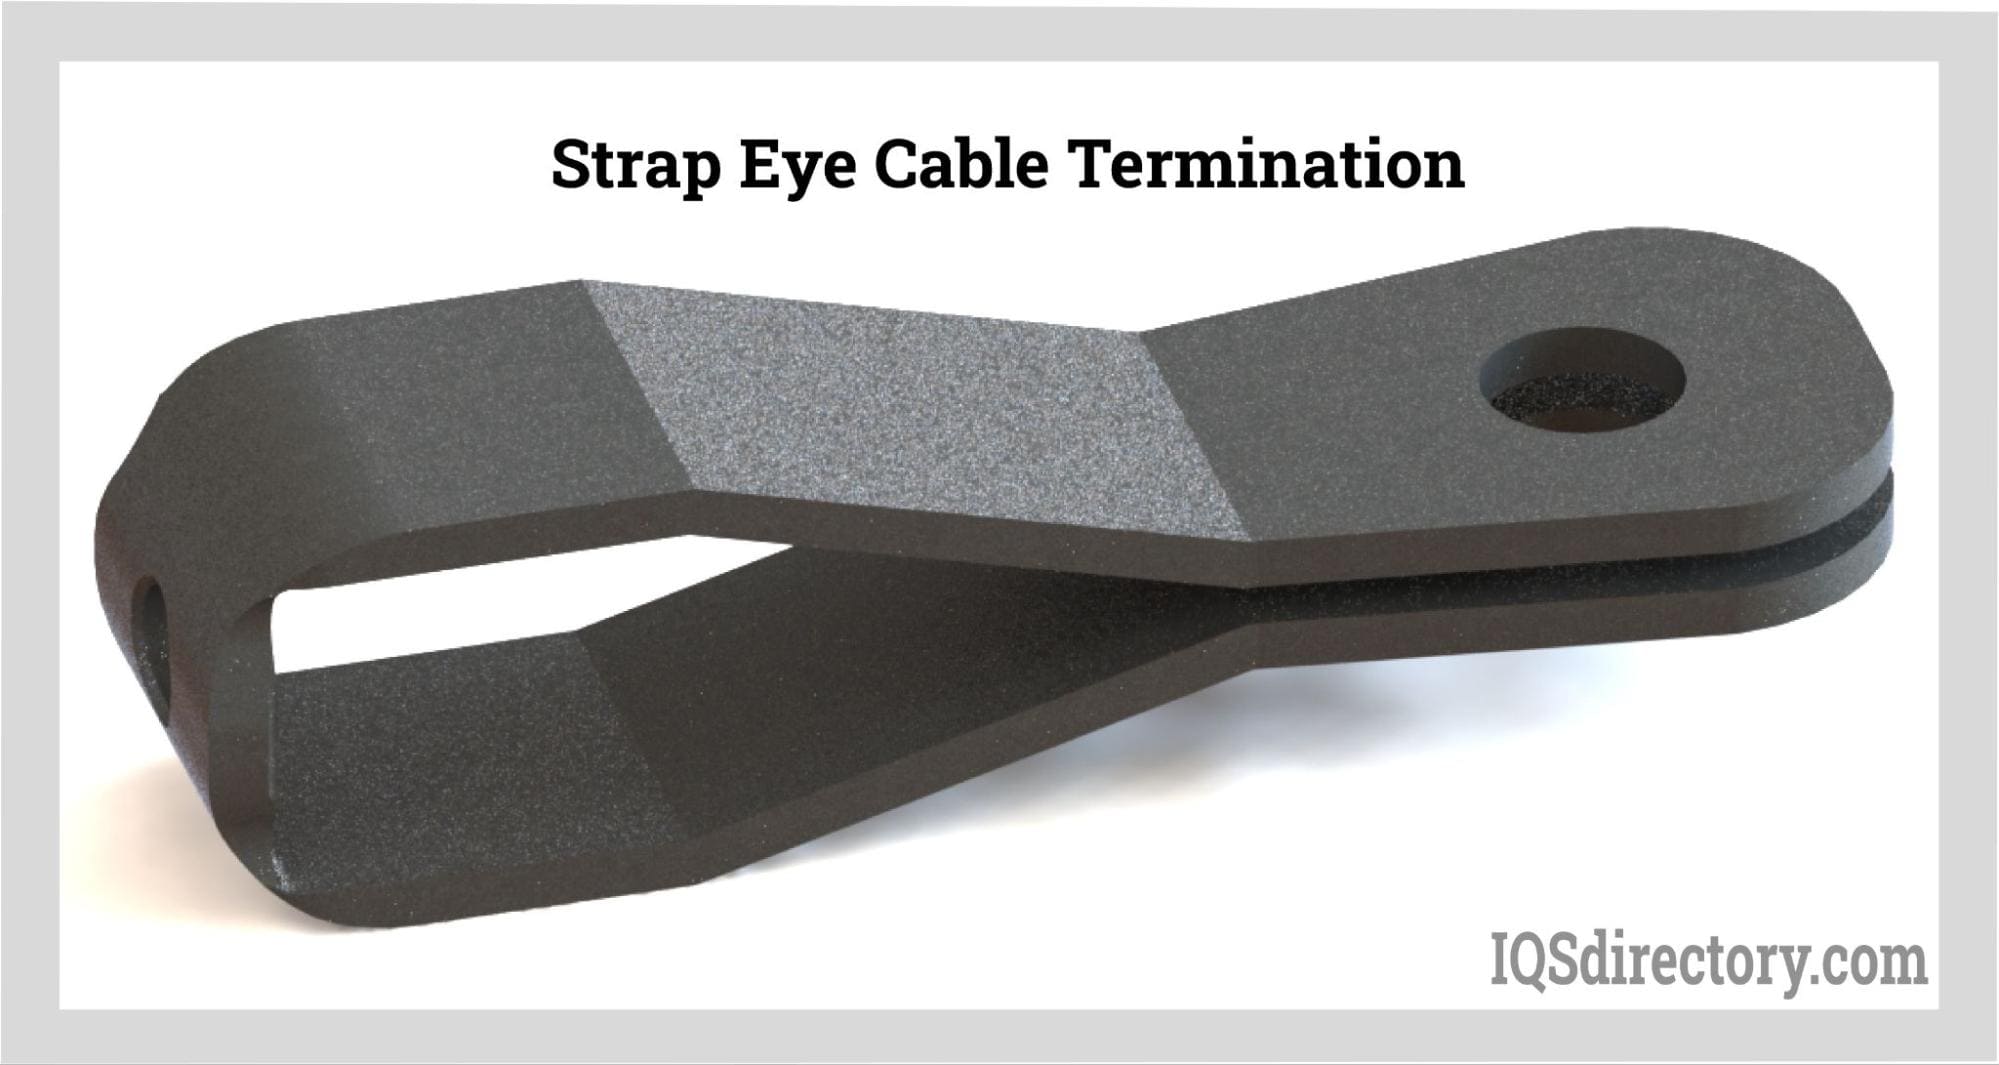 Strap Eye Cable Termination